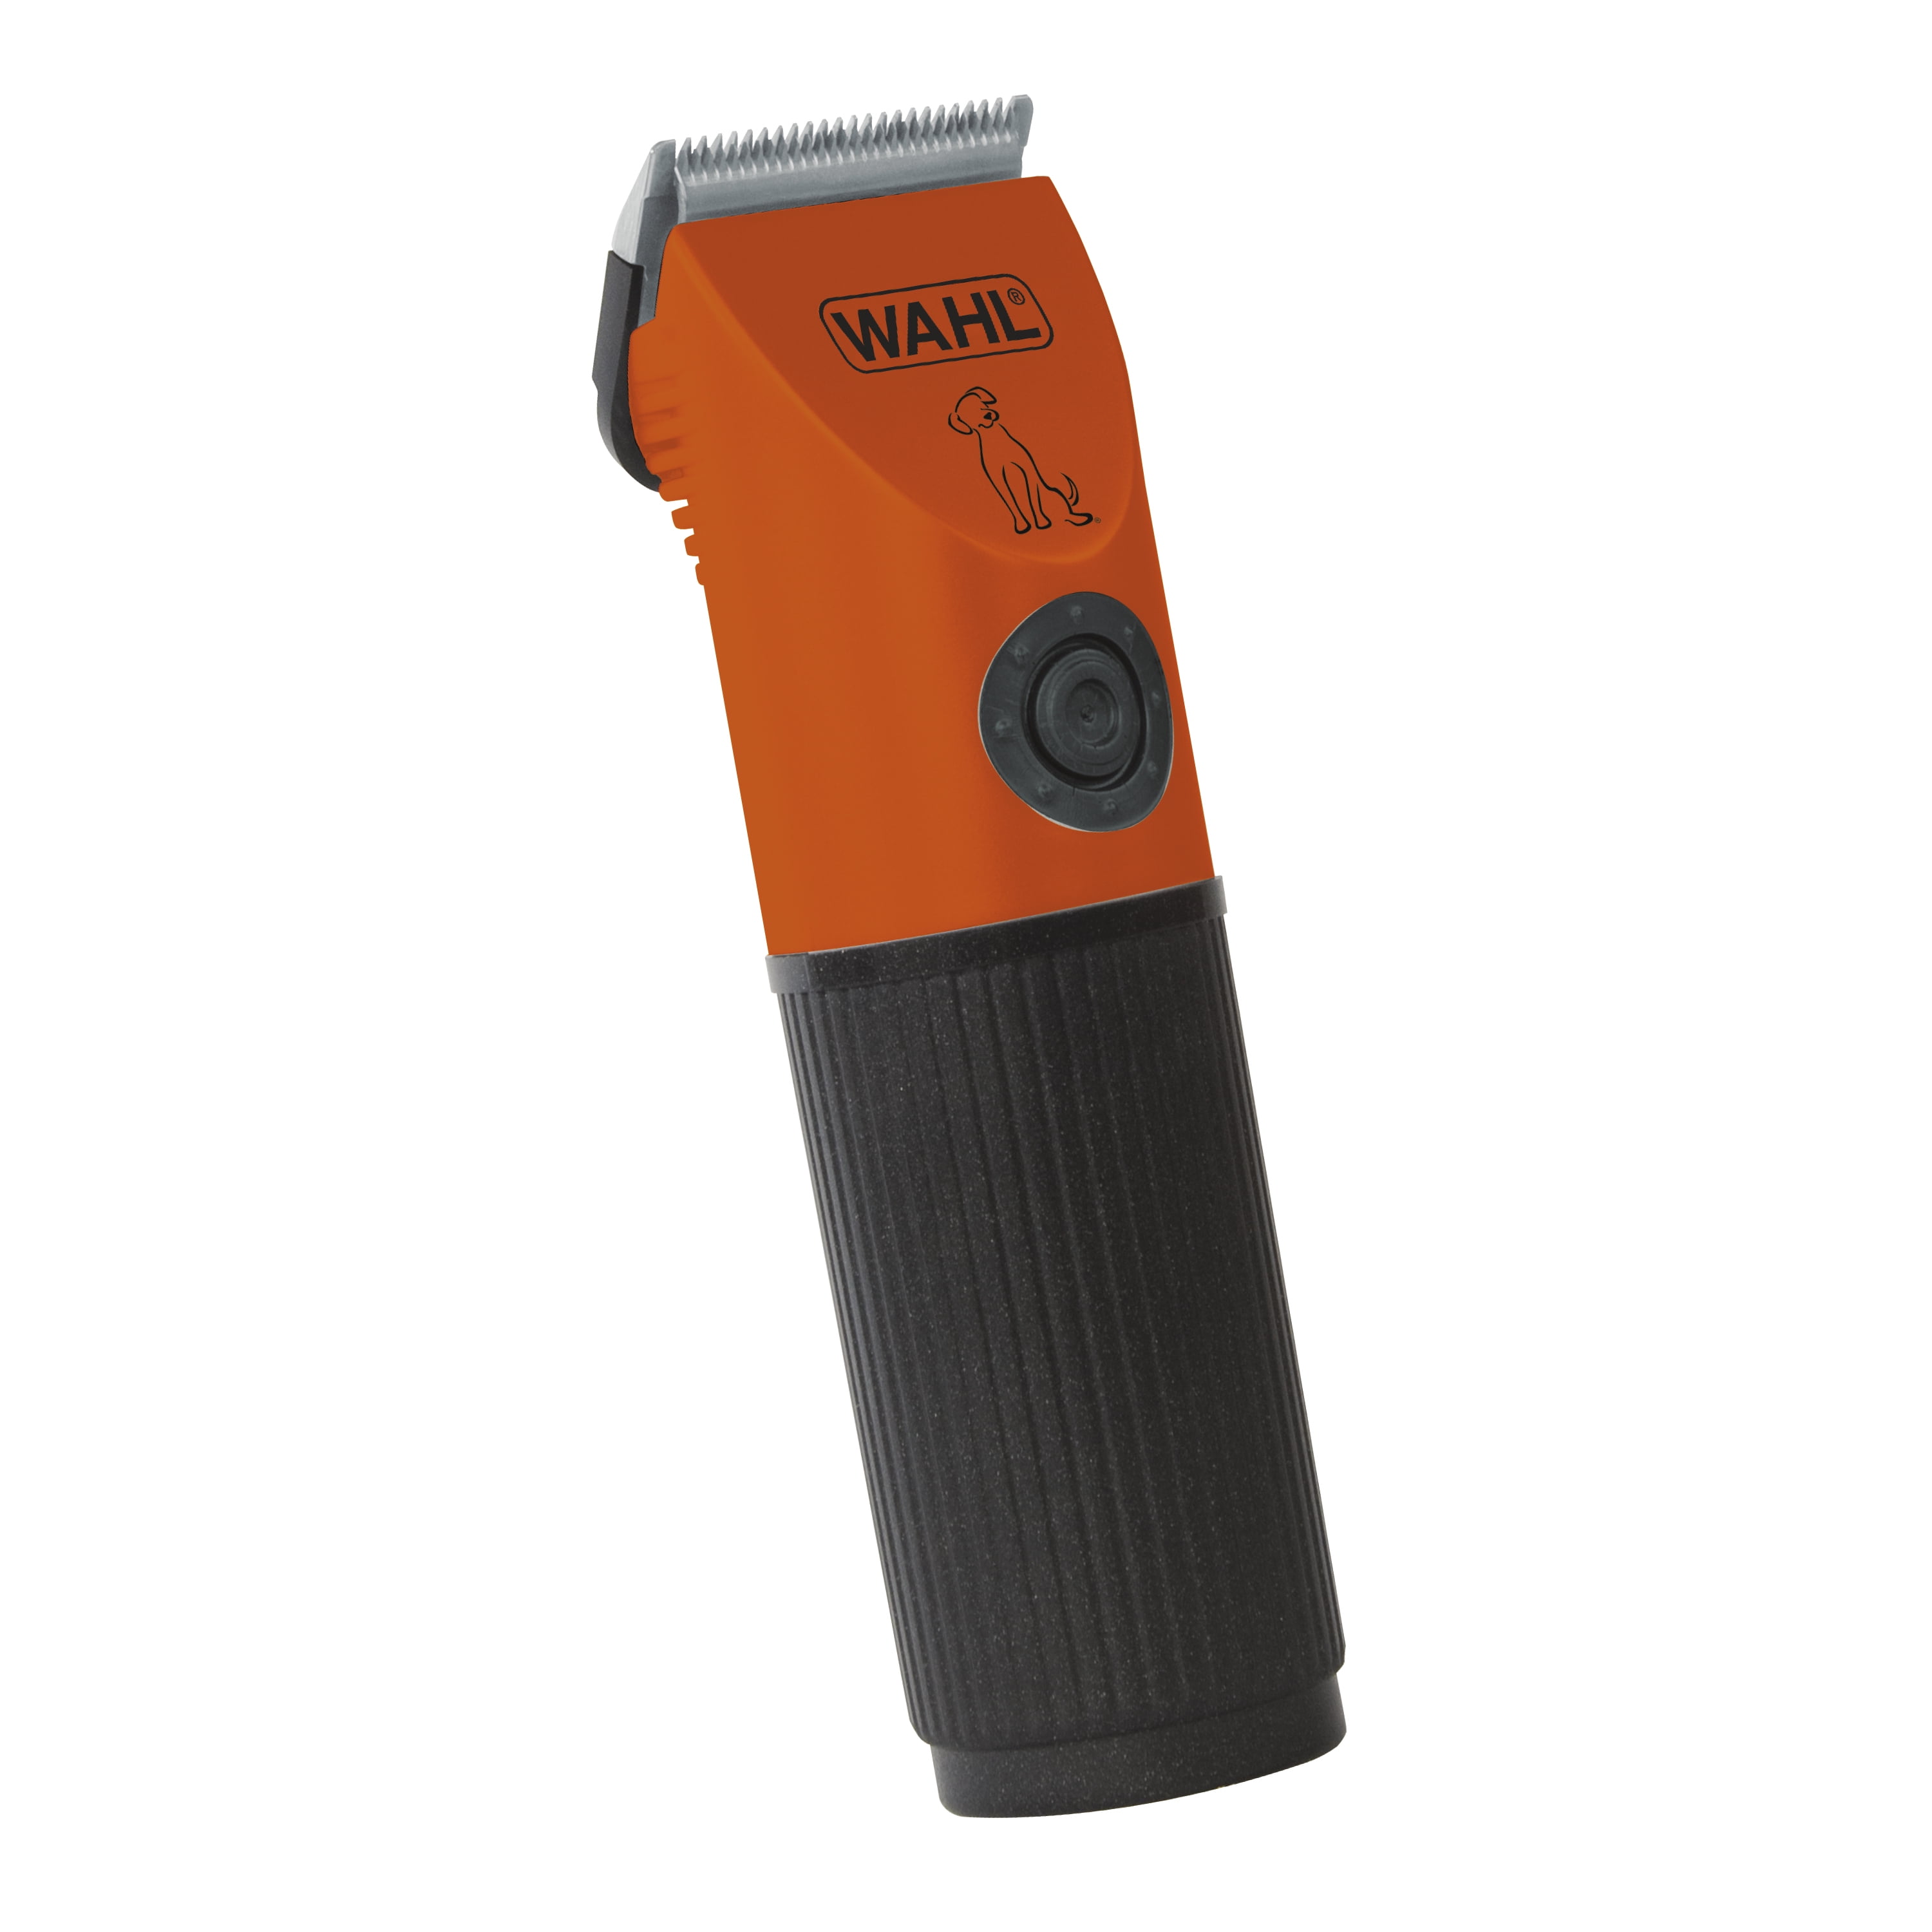 Wahl Touch Up Battery Powered Pet Dog Clipper-Trimmer, Orange/Black - 70008